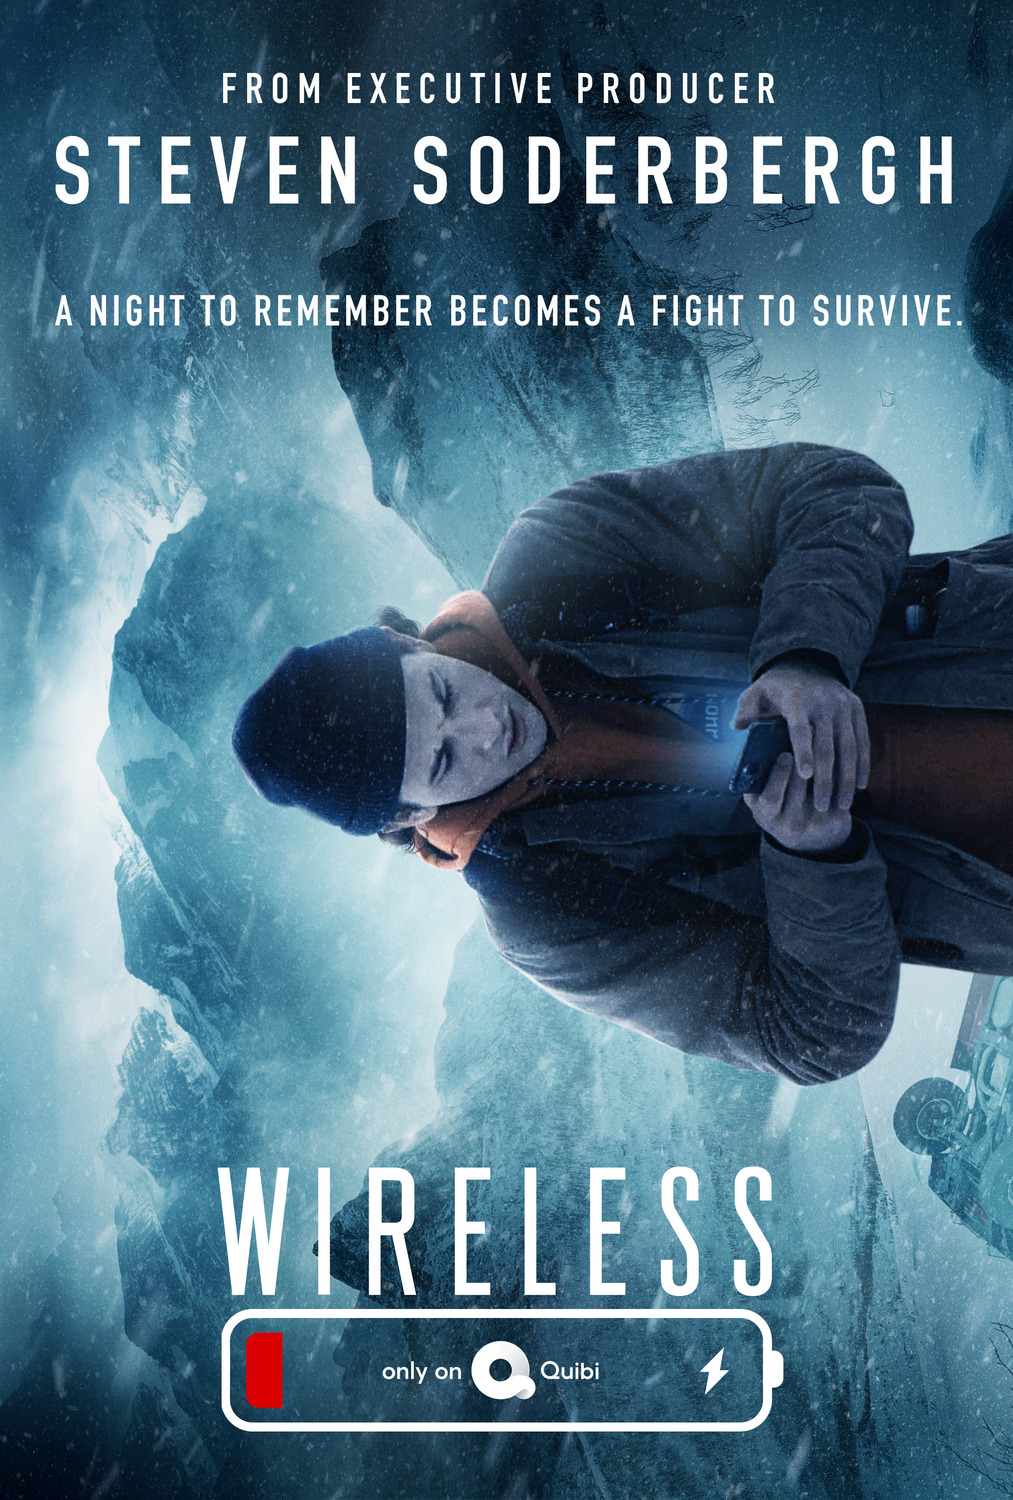 Extra Large TV Poster Image for Wireless 